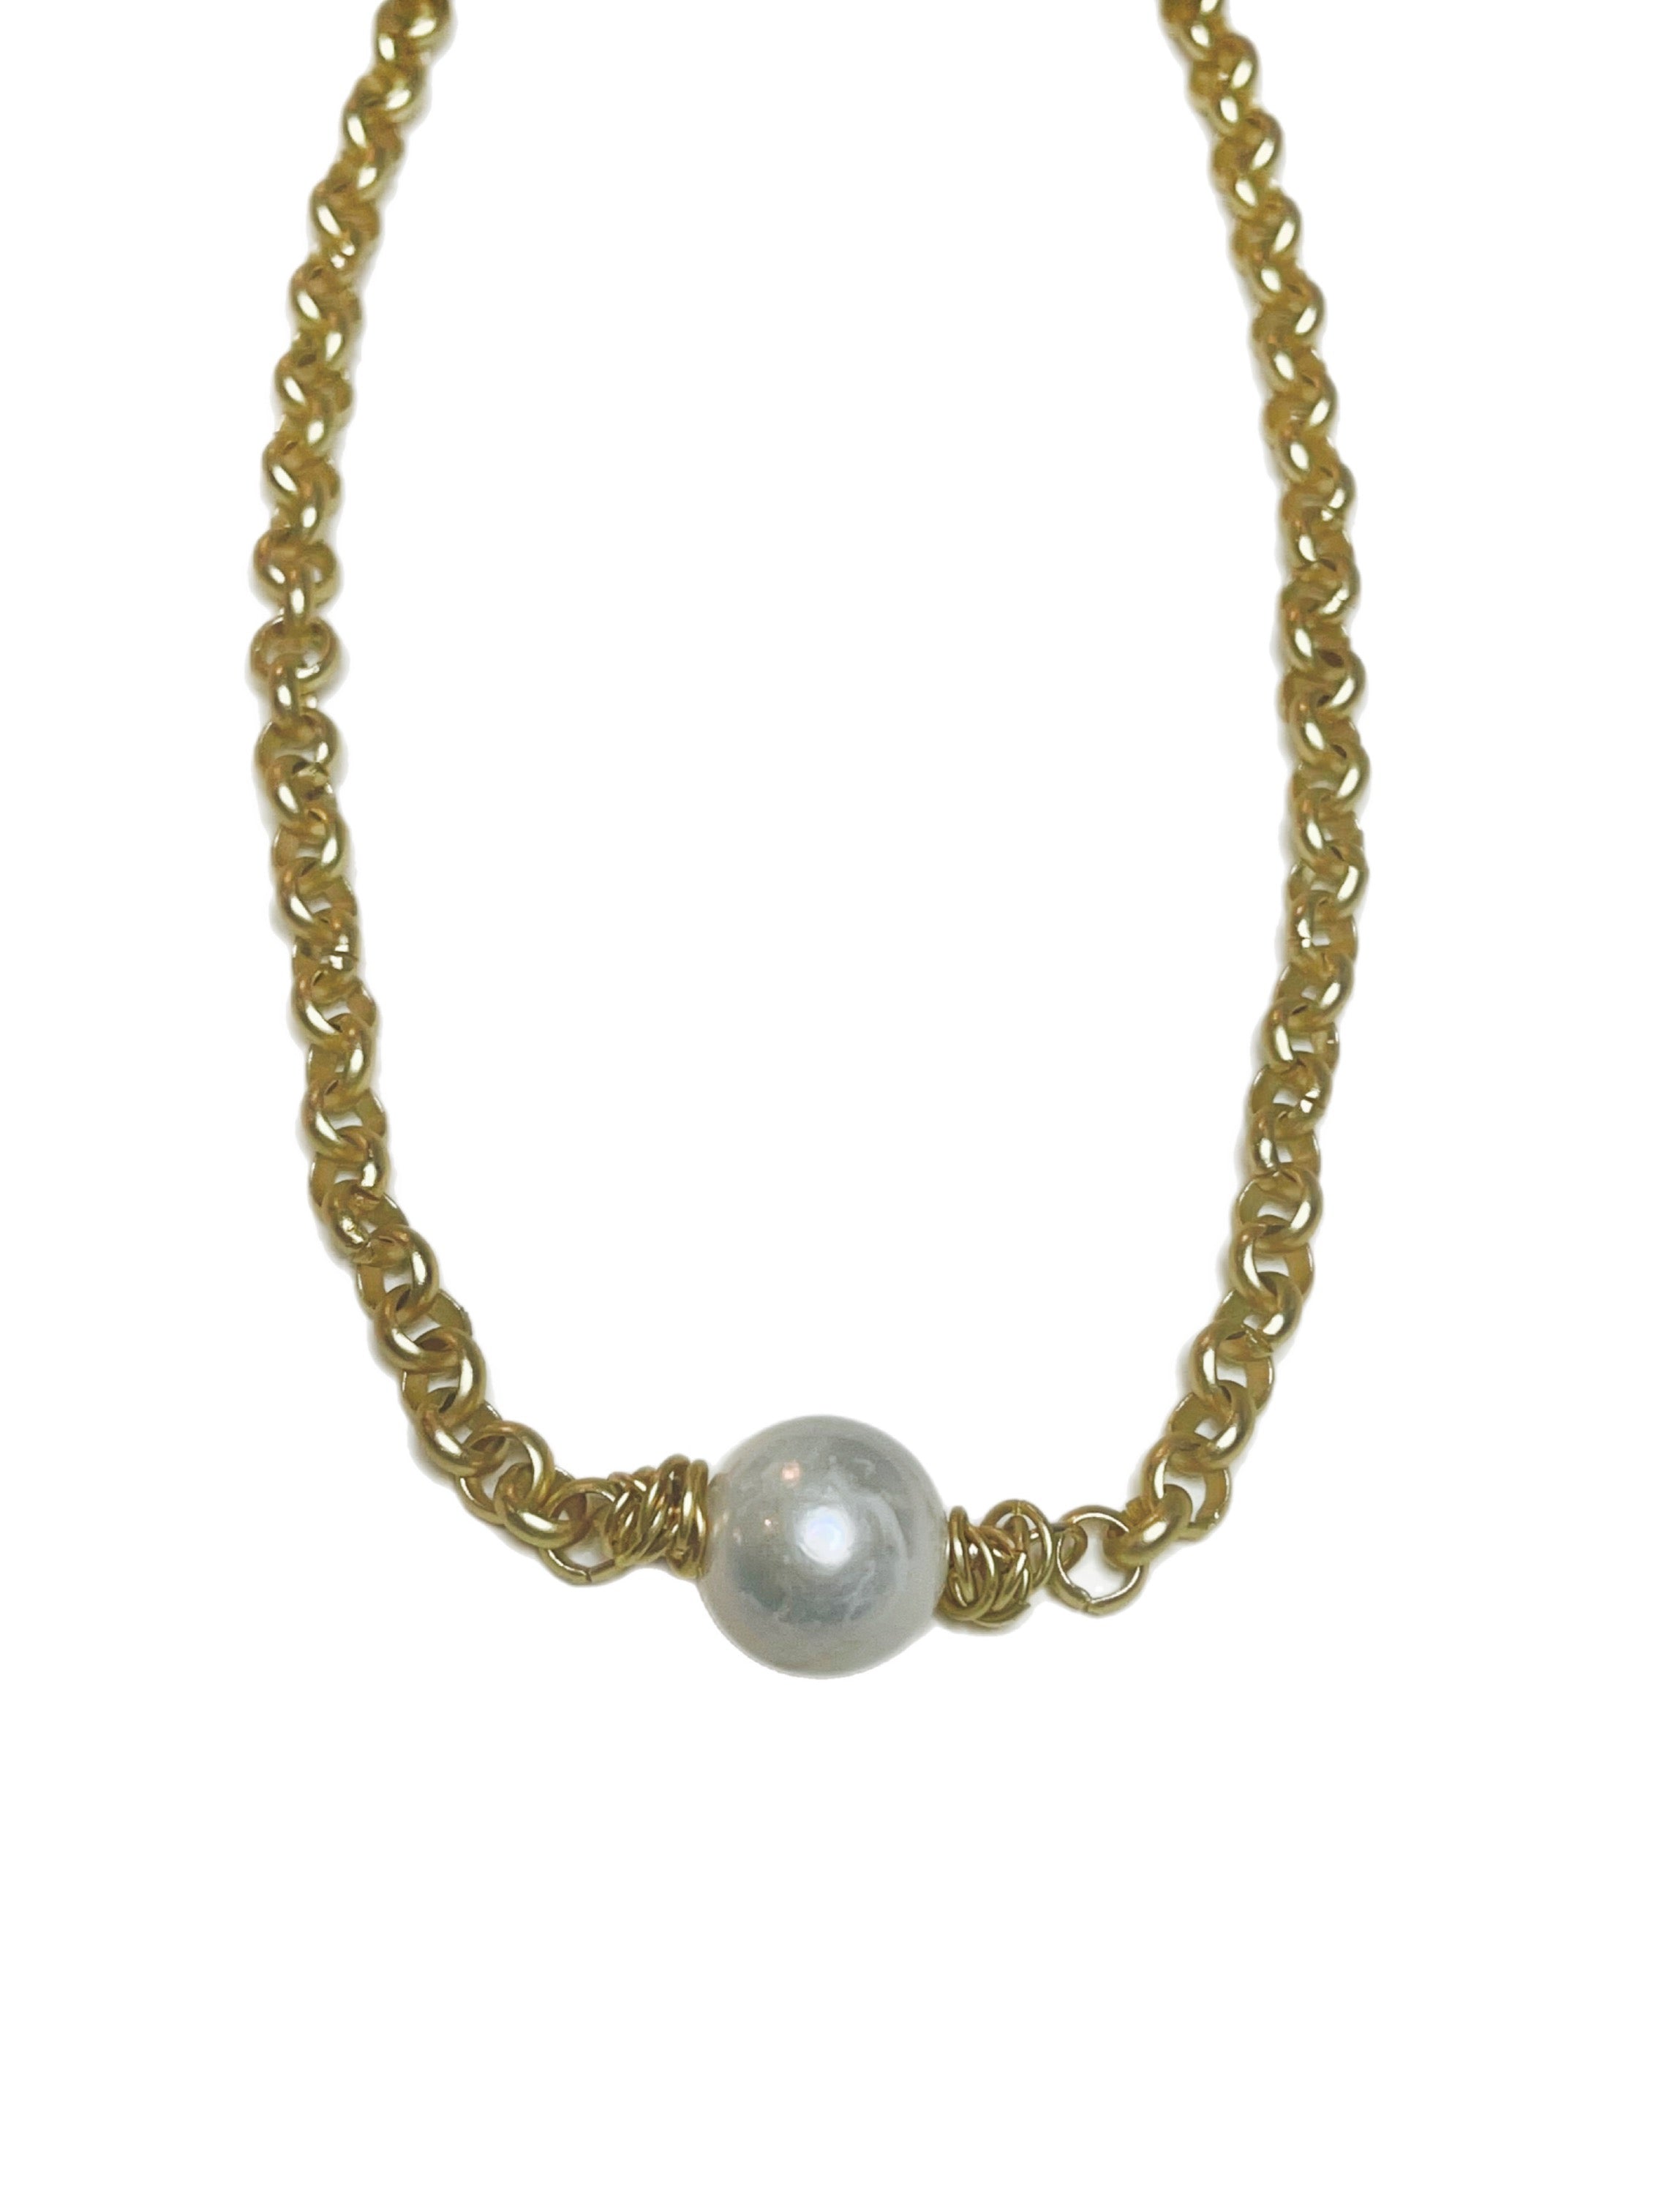 Liz - necklace with pearl center connector